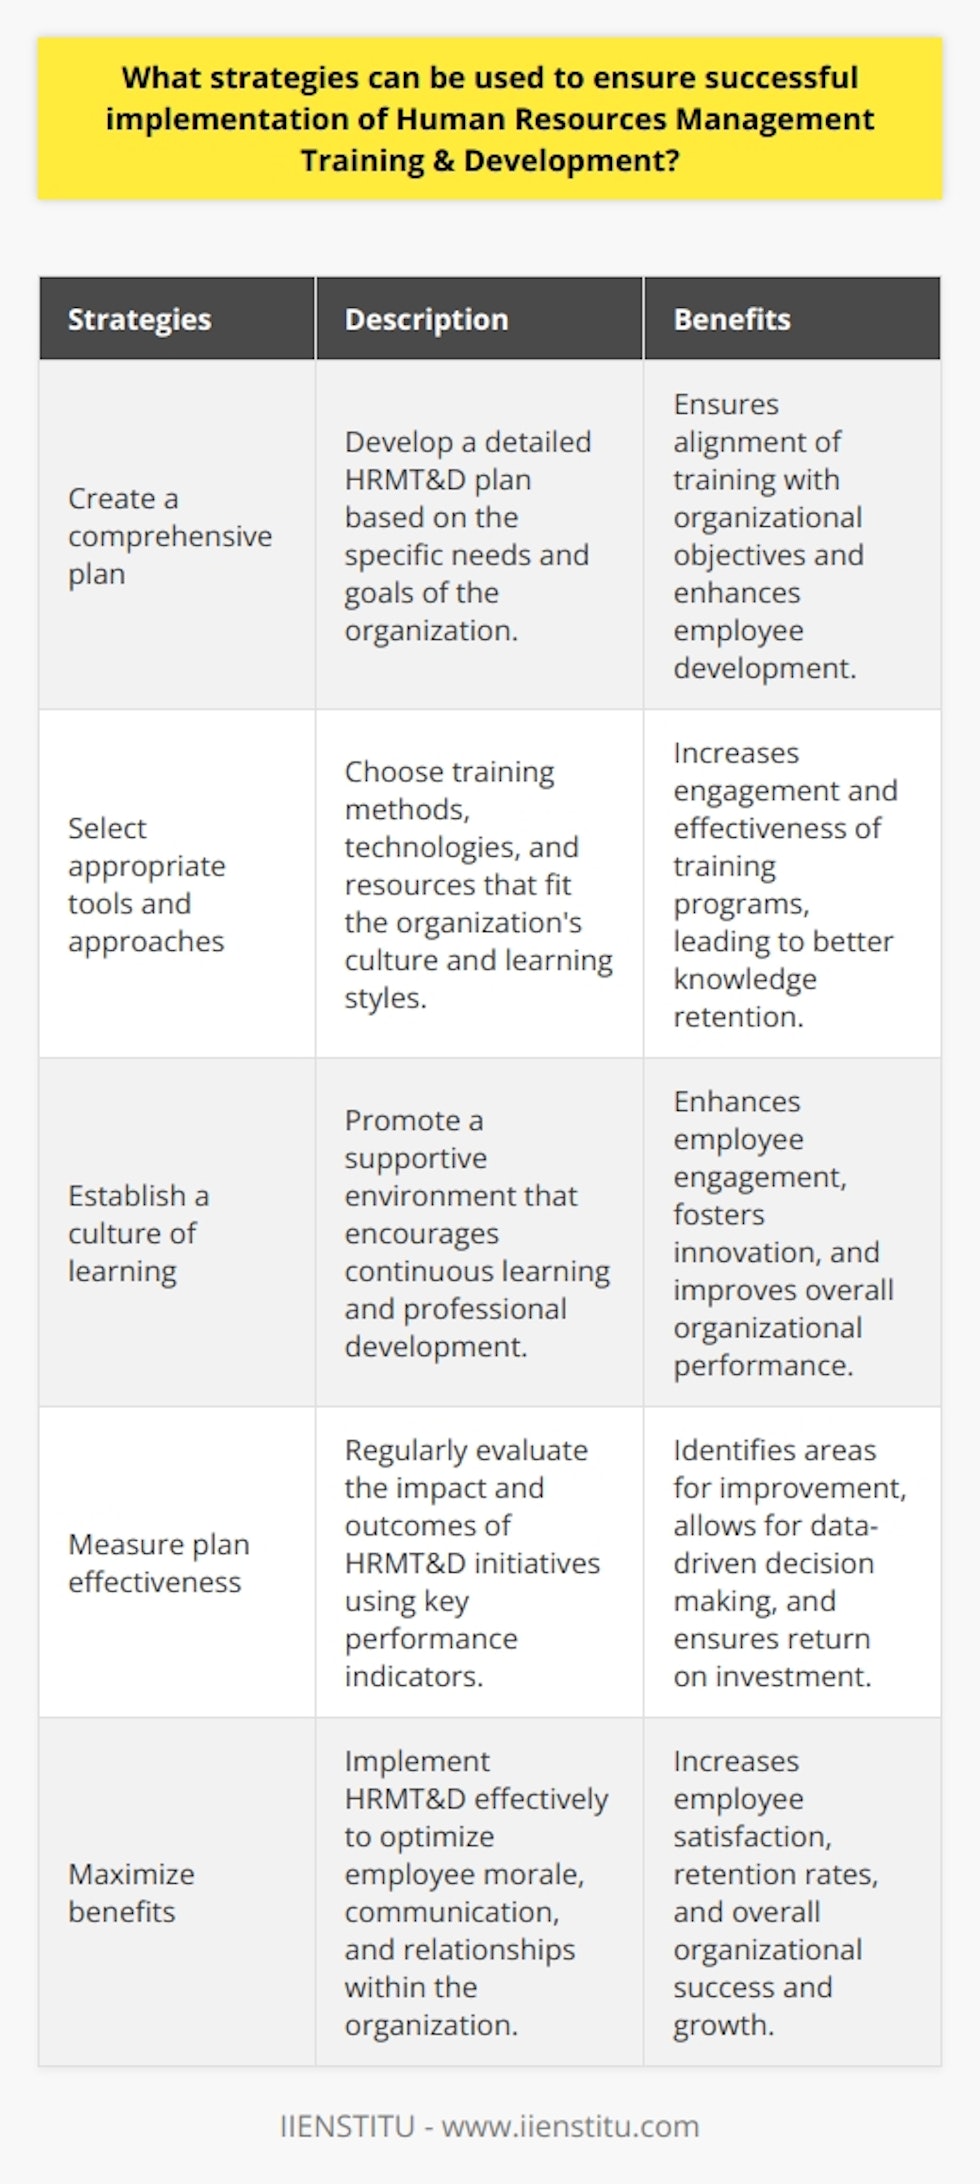 To summarize, successful implementation of Human Resources Management Training & Development (HRMT&D) can be ensured by creating a comprehensive plan tailored to the organization's needs, selecting appropriate tools and approaches, establishing a culture of learning, and measuring the effectiveness of the plan. These strategies can help organizations maximize the benefits of HRMT&D, improve employee morale, and facilitate better communication and relationships within the organization. It is essential for organizations to invest time and effort into implementing HRMT&D effectively as it can contribute significantly to their overall success and growth.